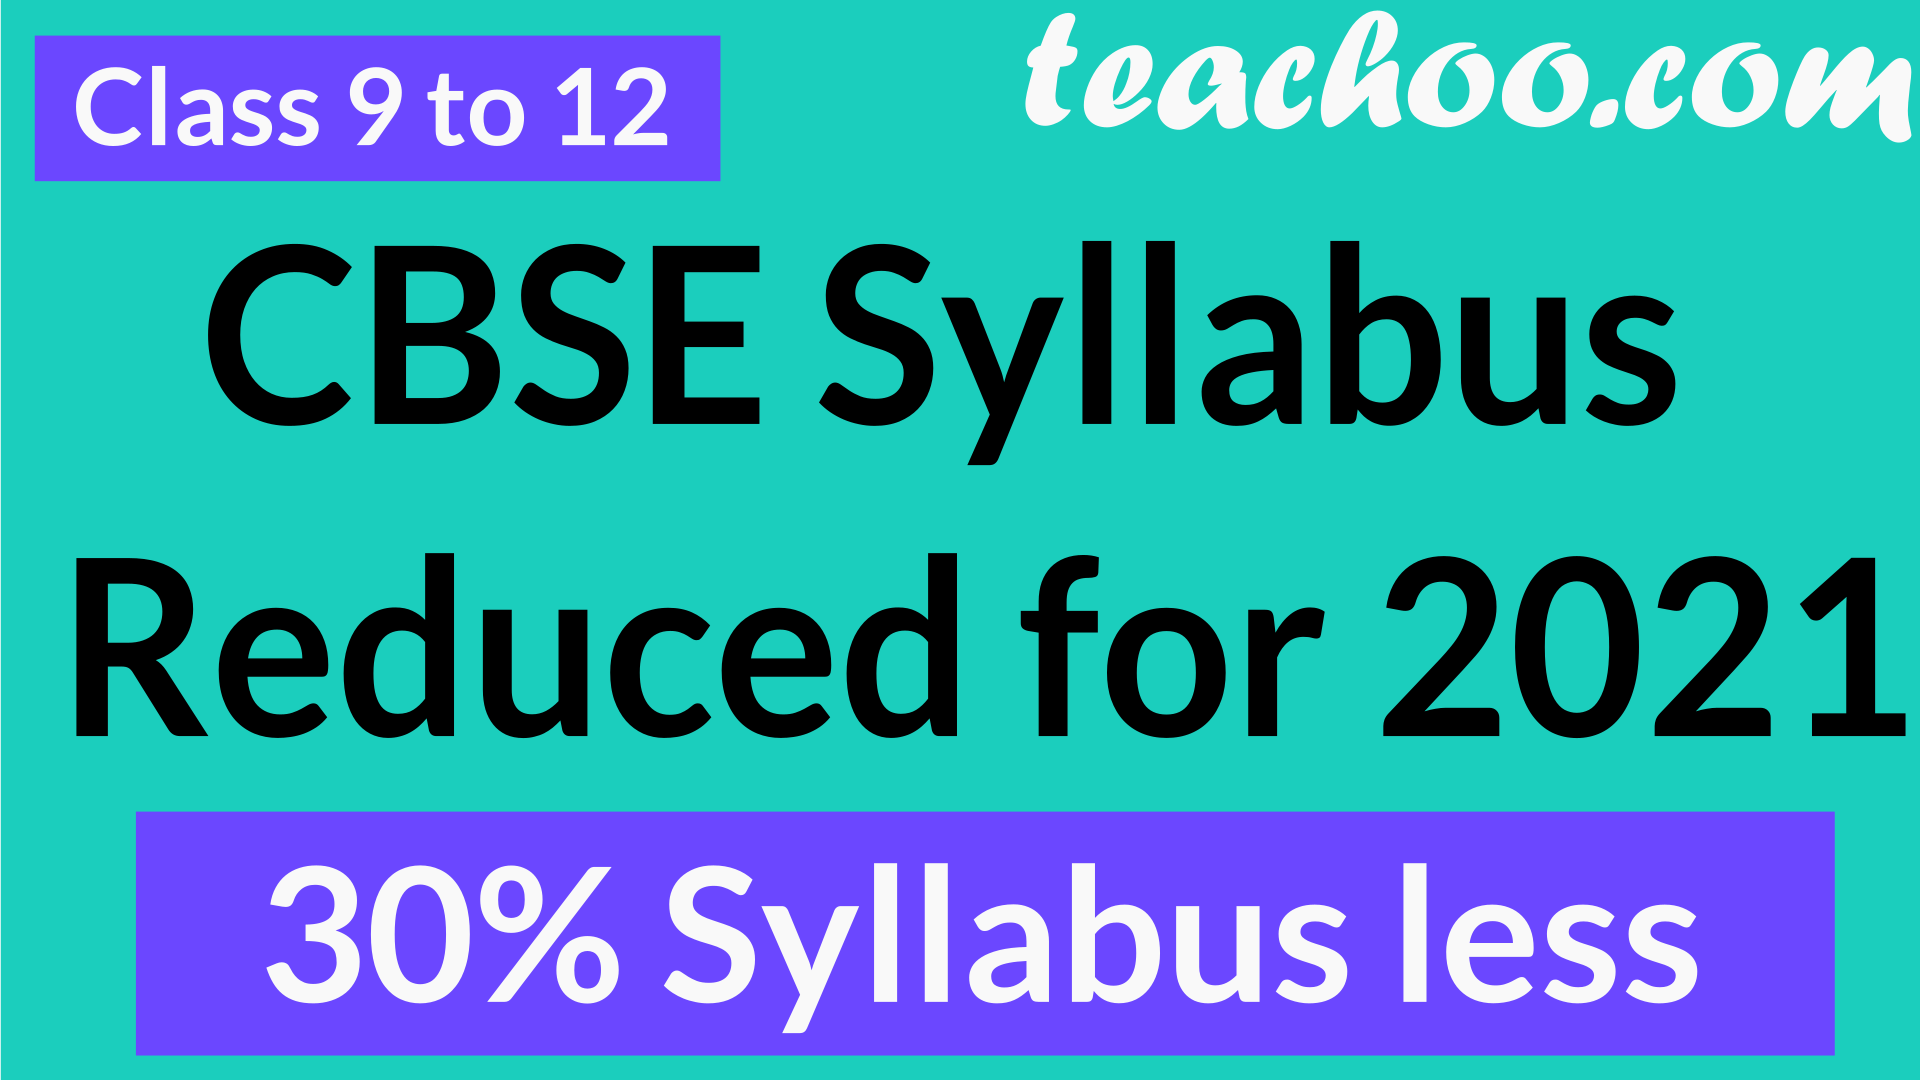 CBSE Syllabus reduced by 30% for 2021 Board Exams - Class 9 to 12